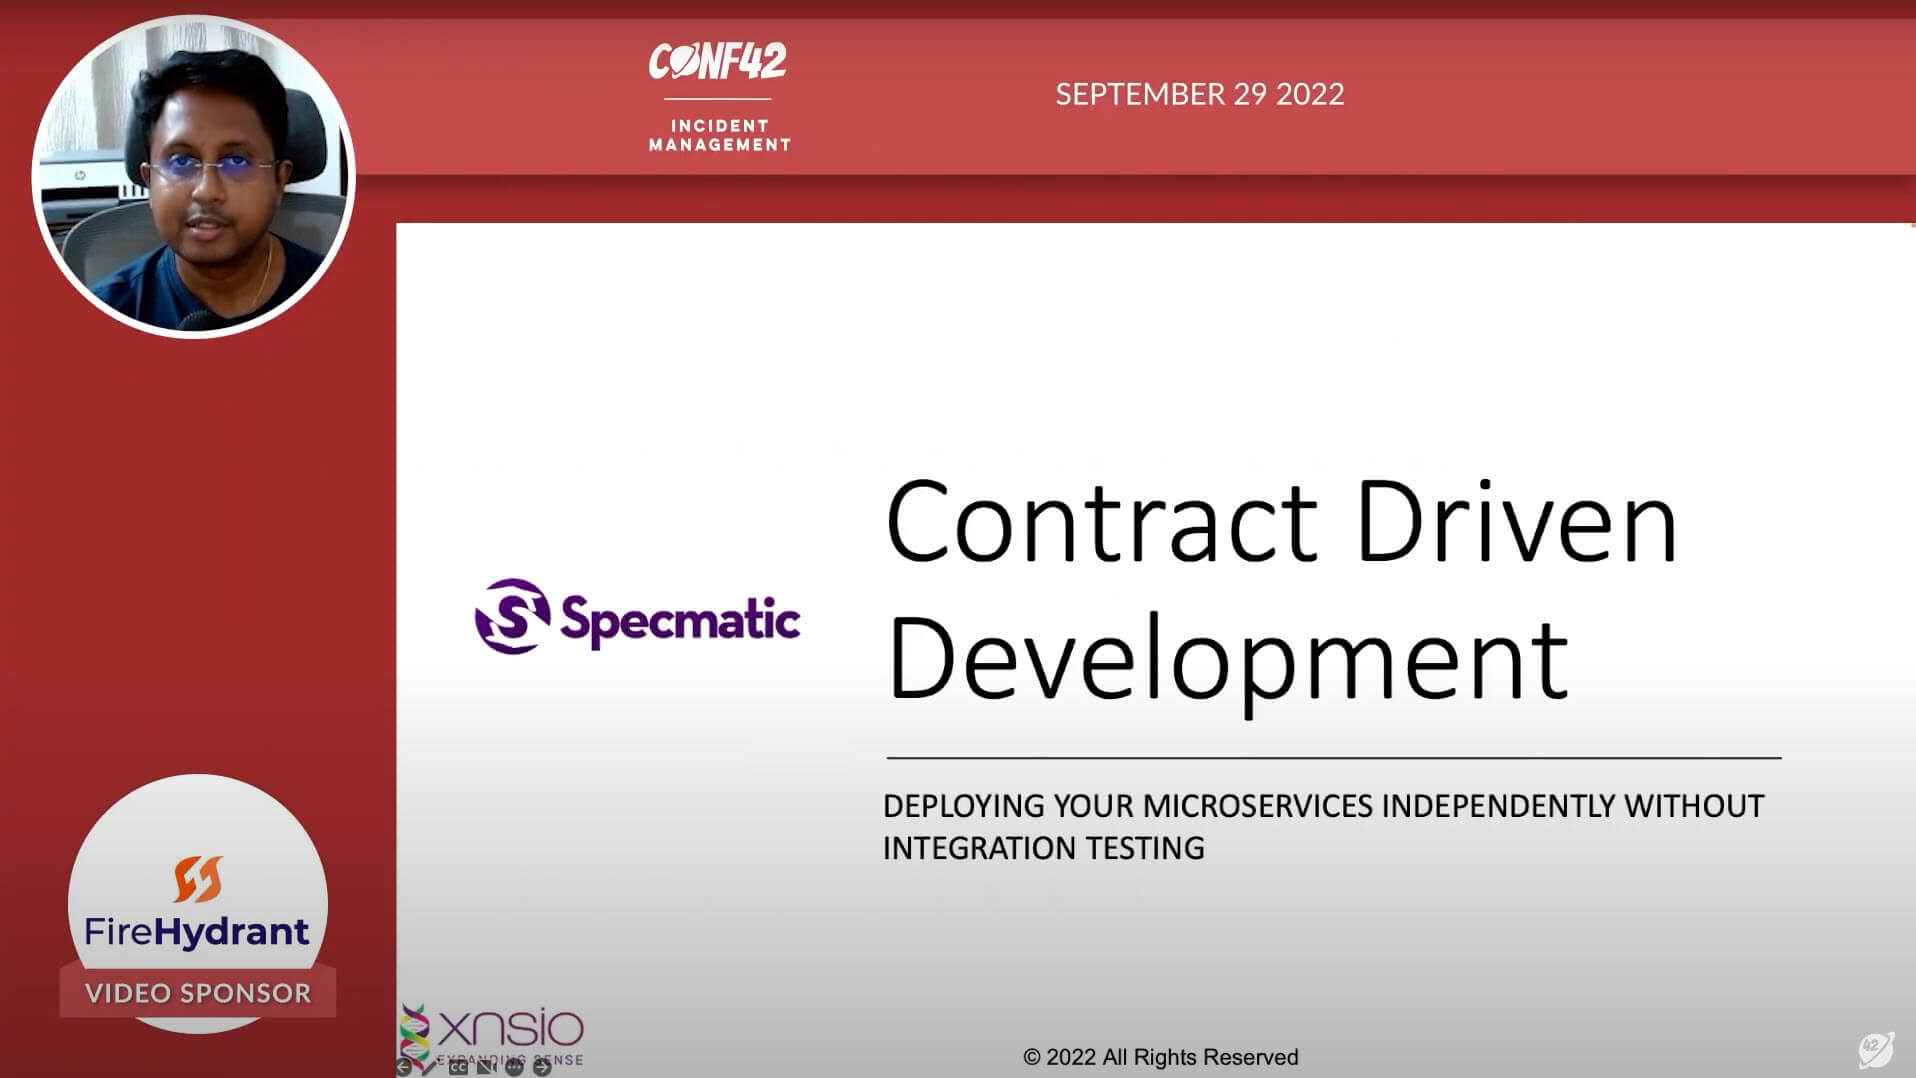 Contract Driven Development focuses on the use of contracts for guiding software development and ensuring compliance.